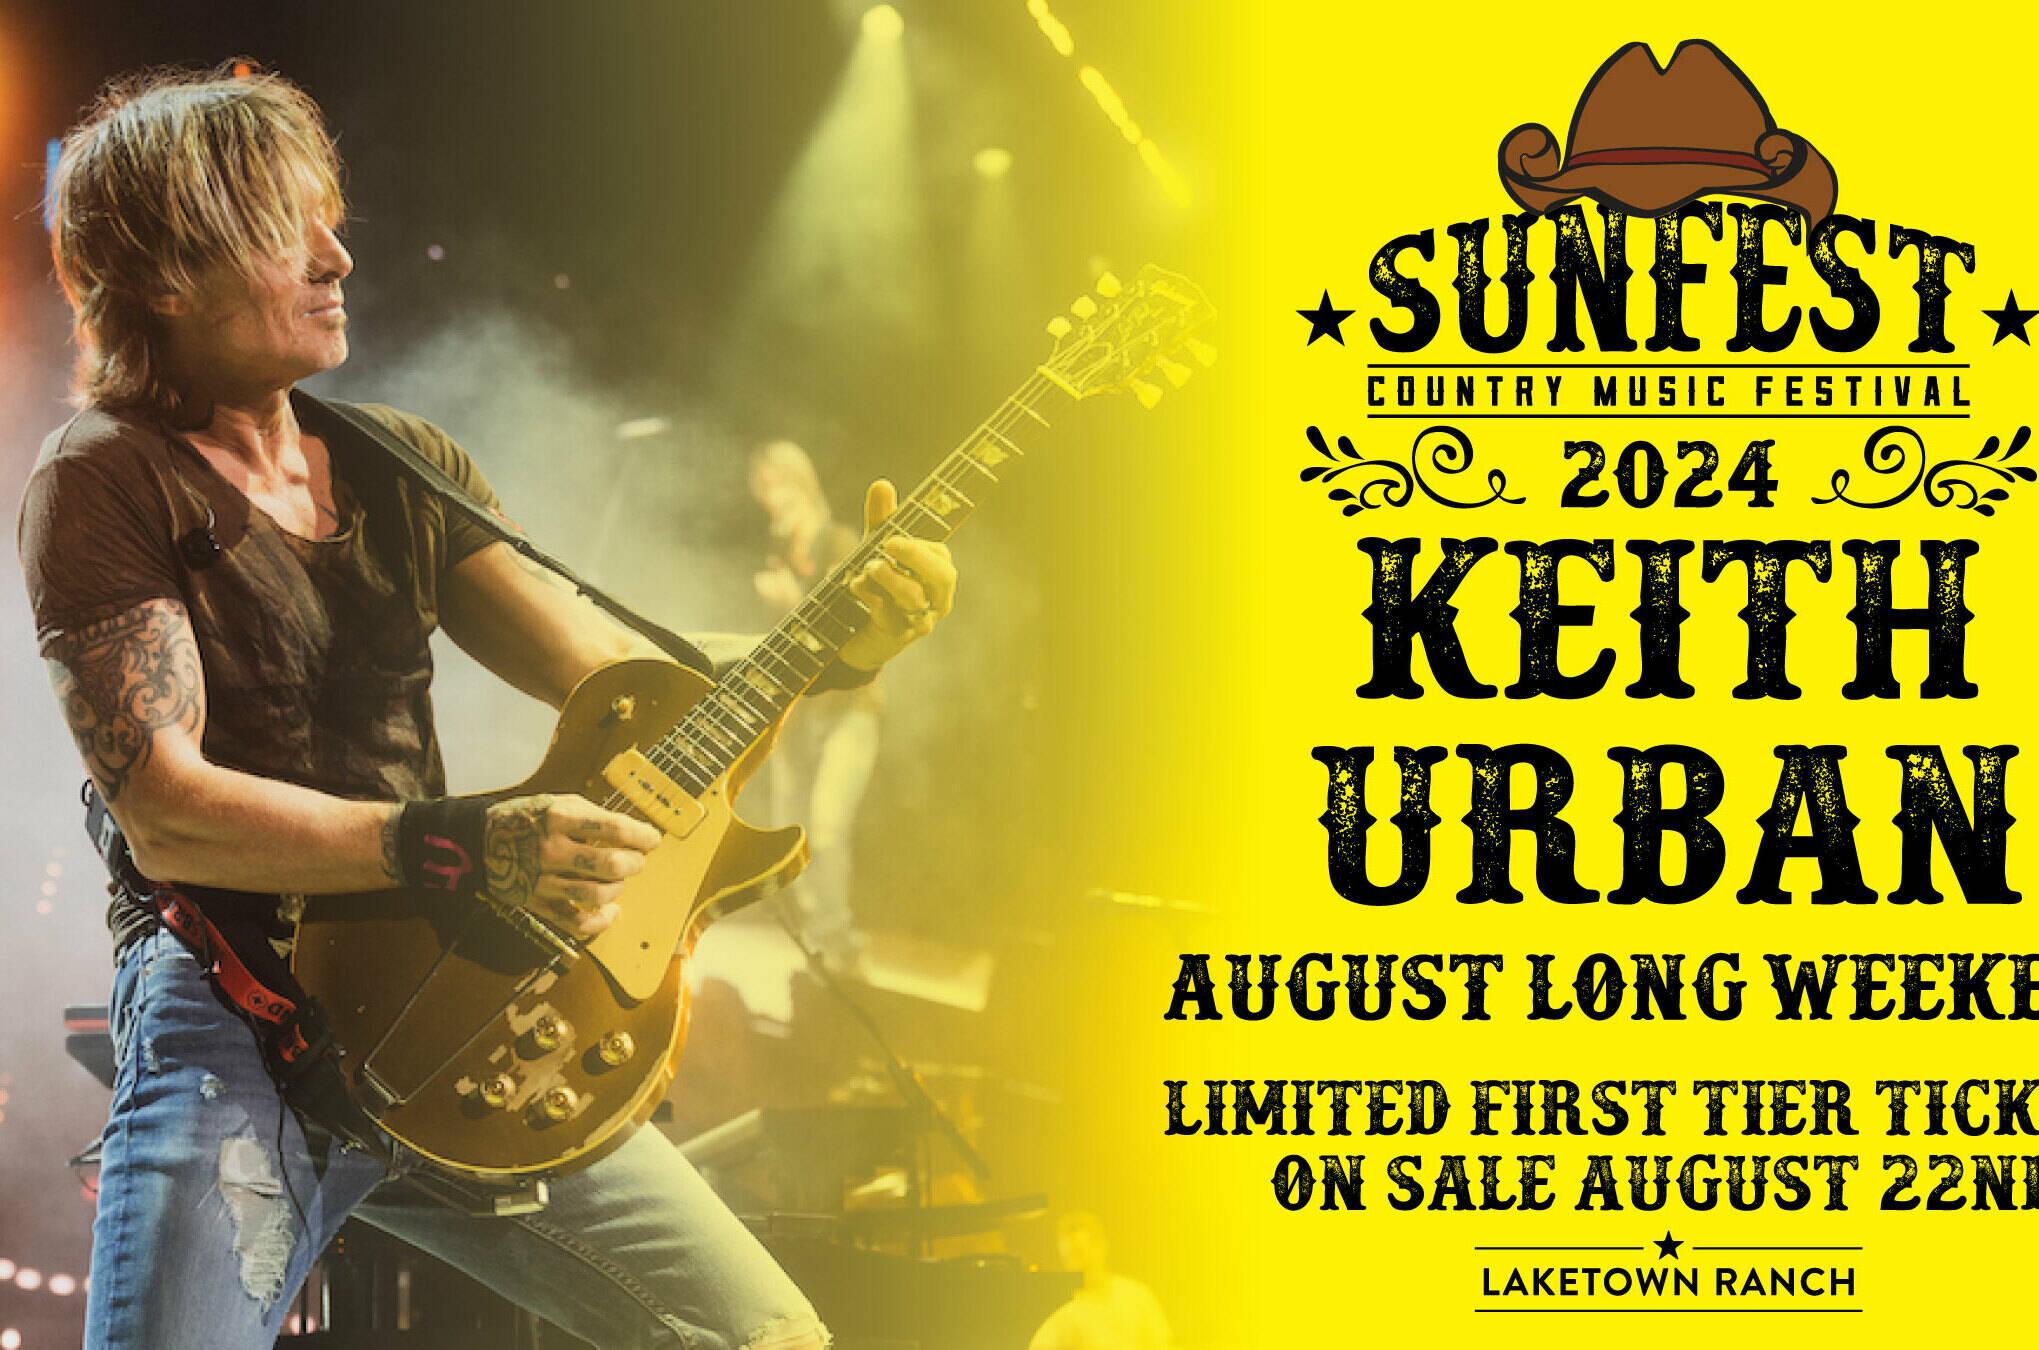 Laketown Ranch has announced that Keith Urban will be headlining Sunfest 2024. Early bird tickets will go on sale on Aug. 22 at 9 a.m. (Courtesy of Sunfest)